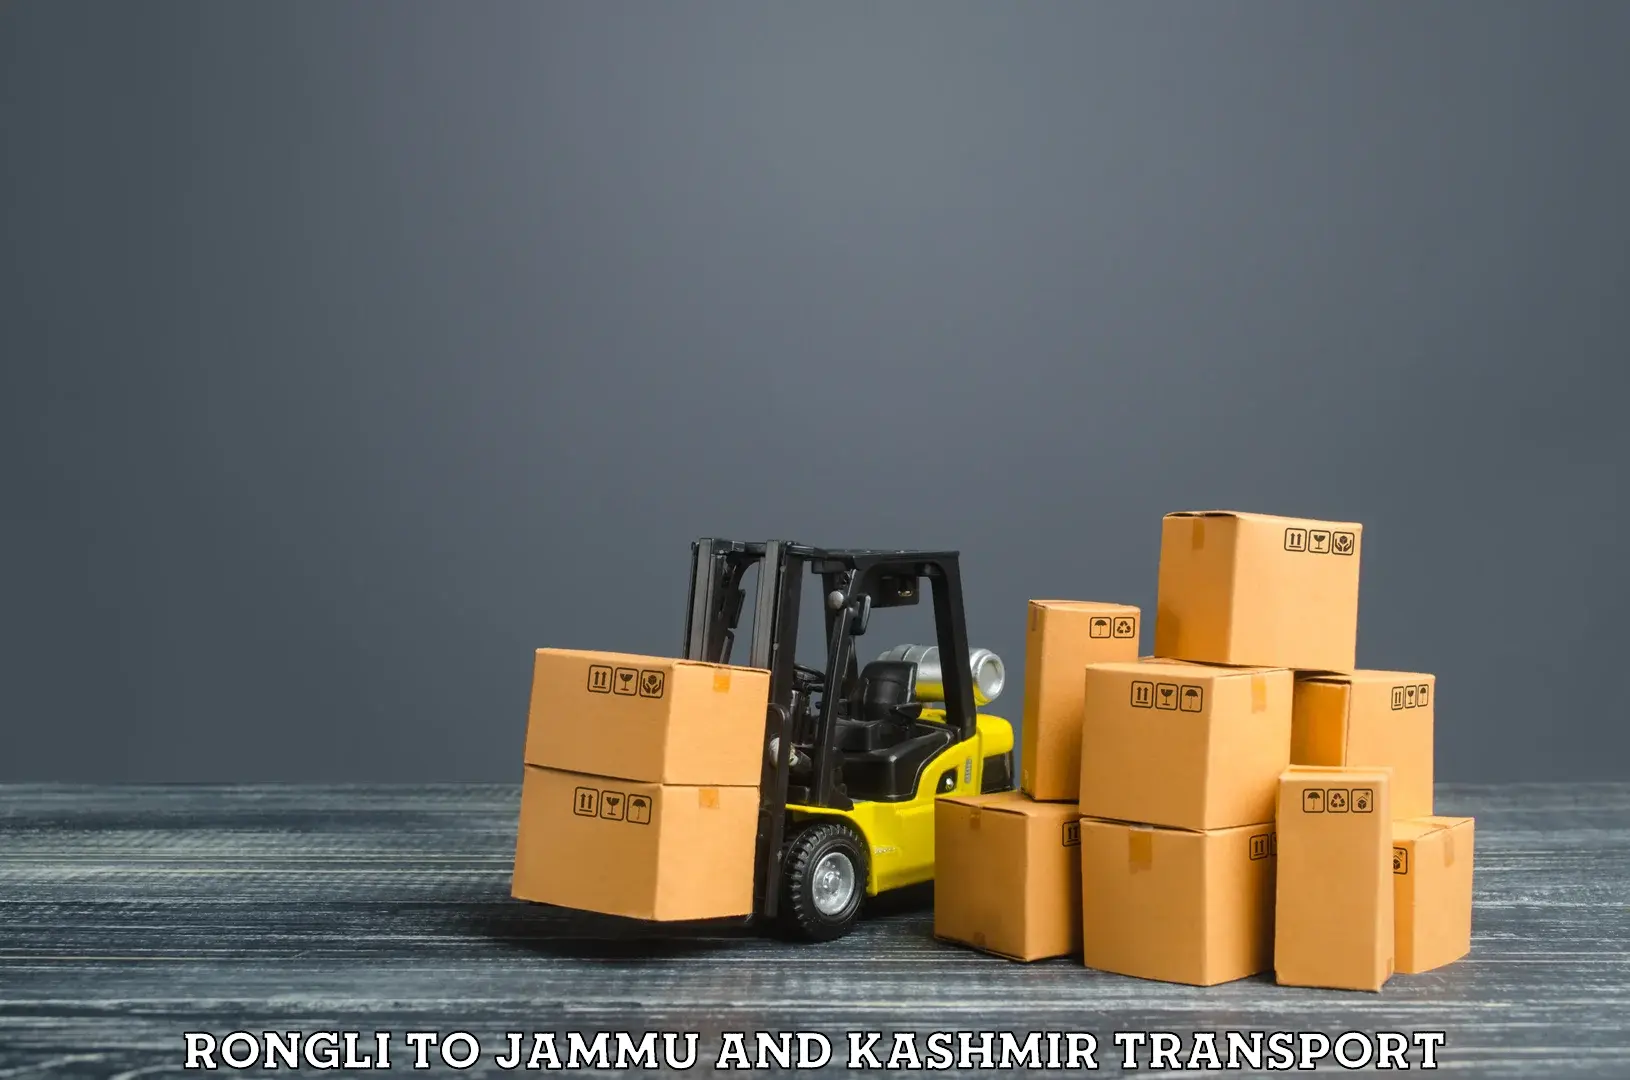 Lorry transport service Rongli to Bhaderwah